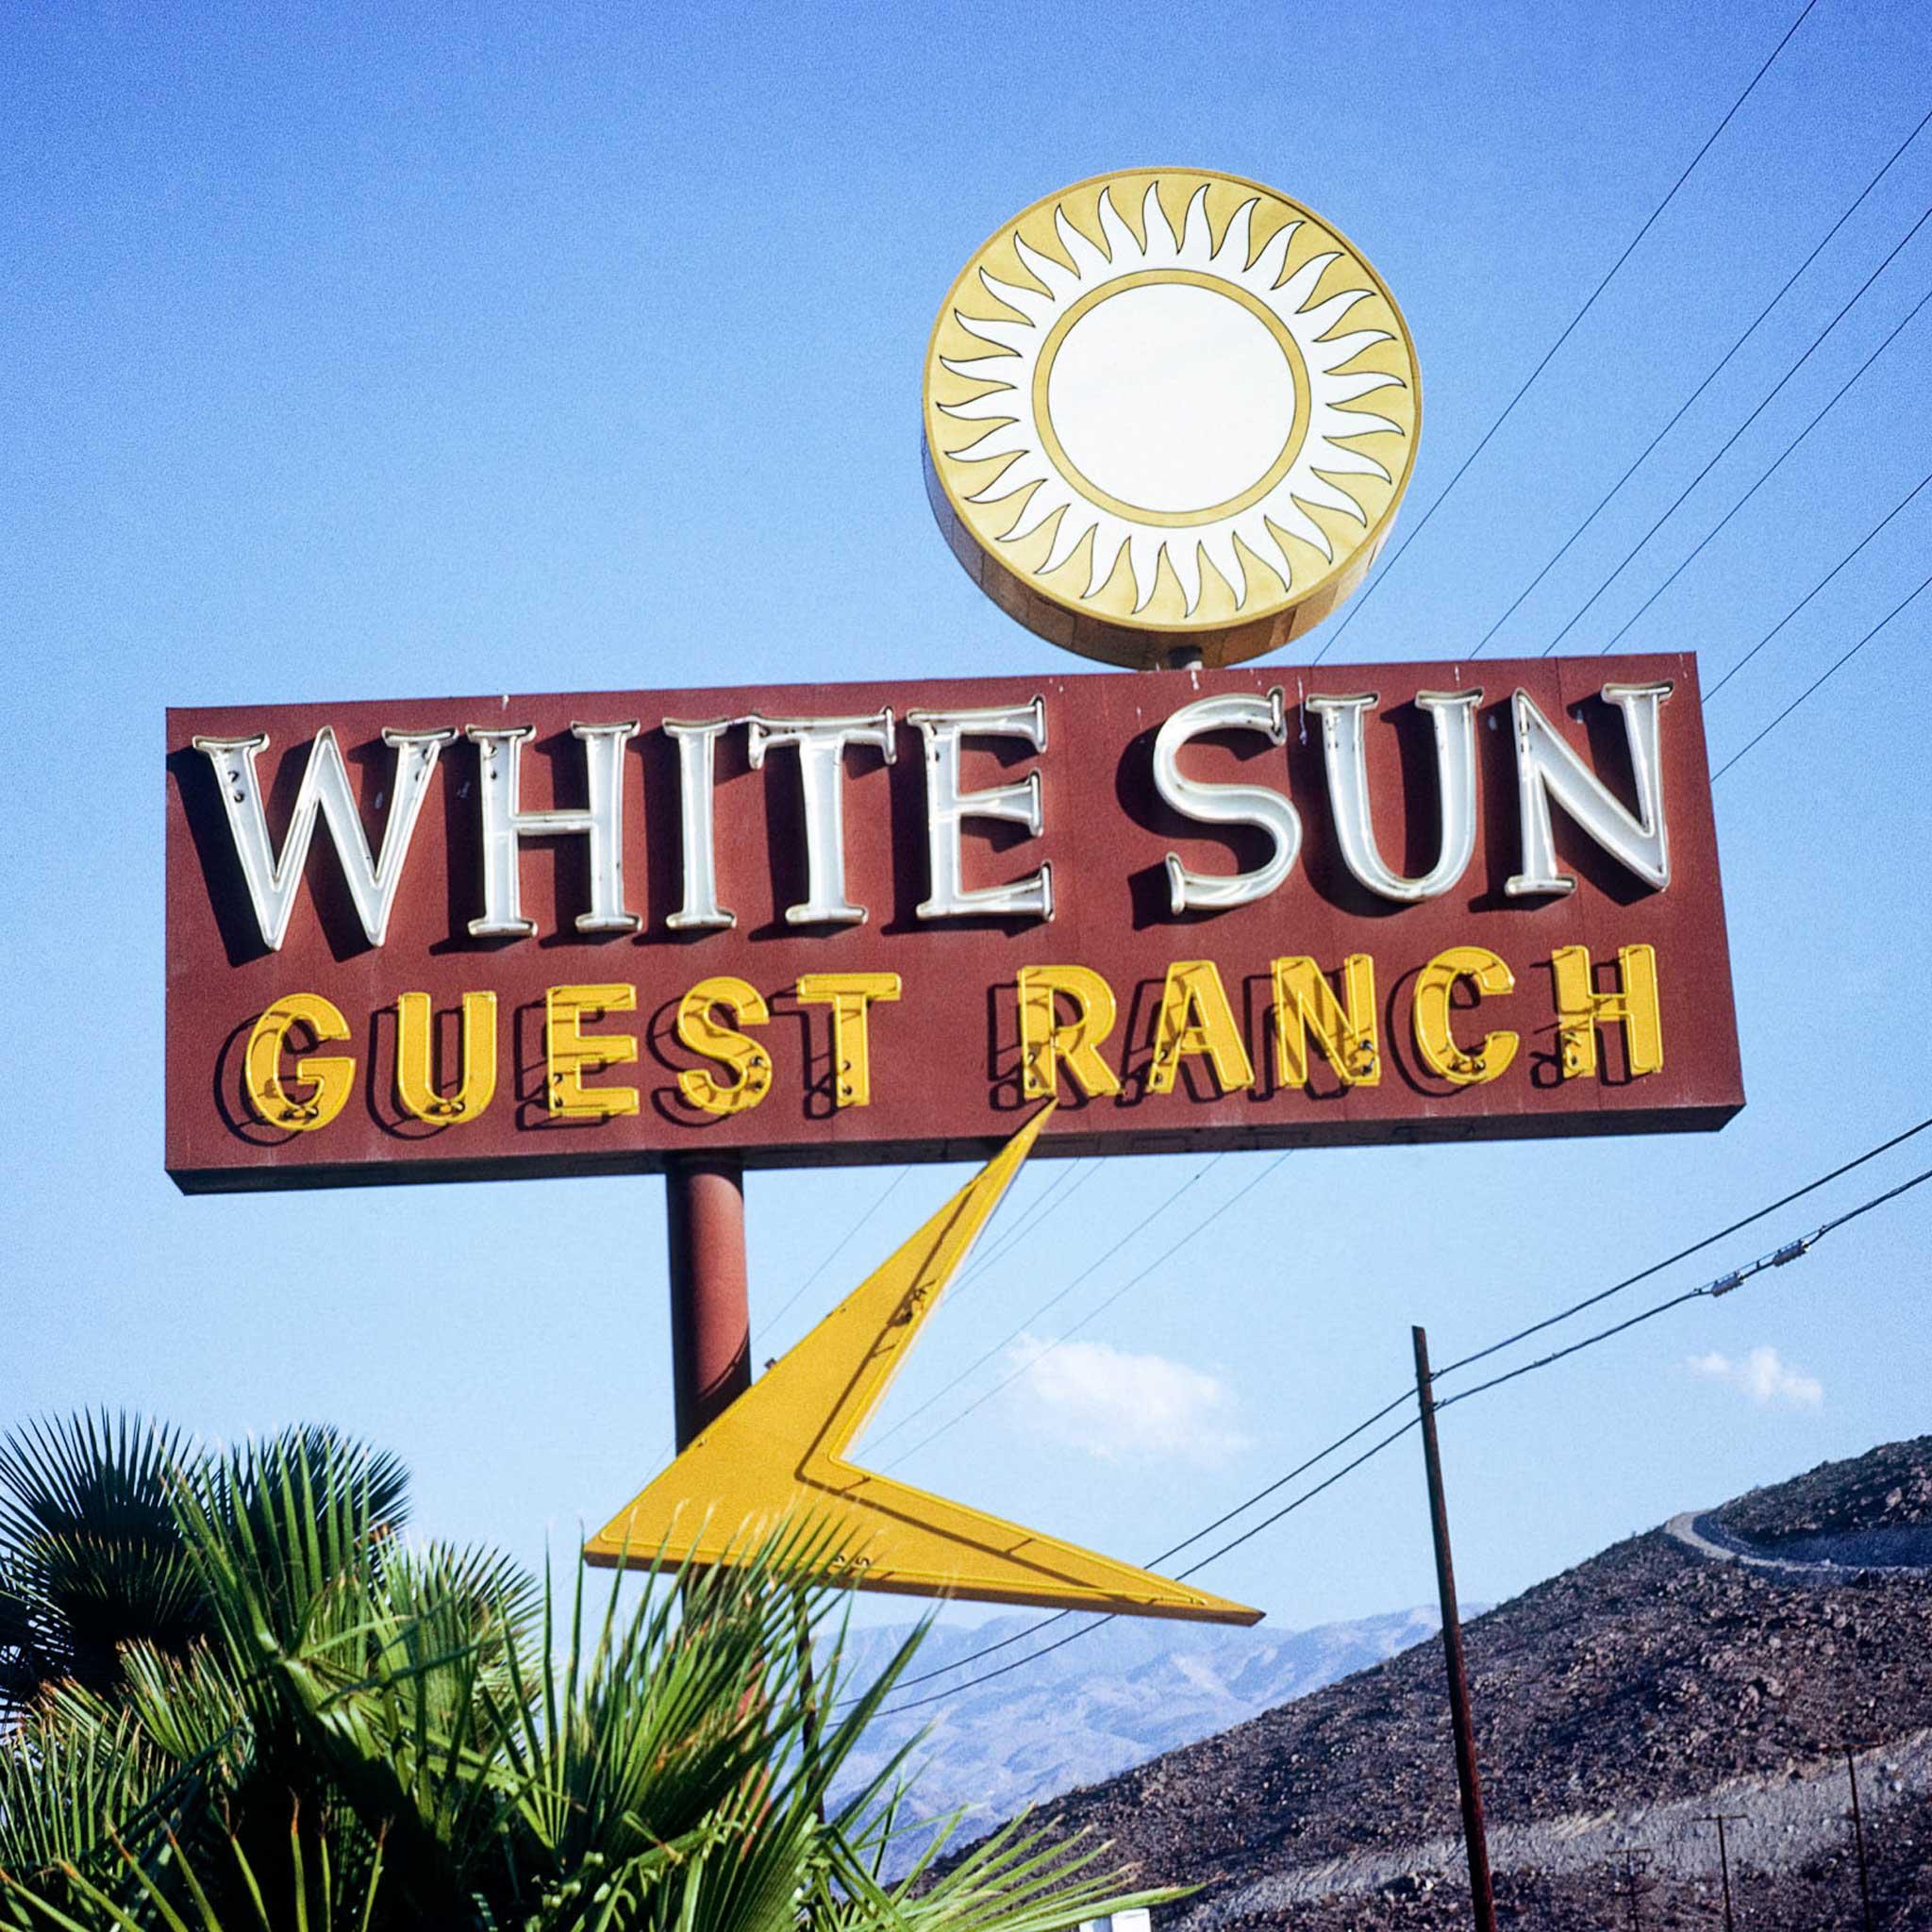 A sign that says "White sun guest ranch" with a yellow and white sun graphic